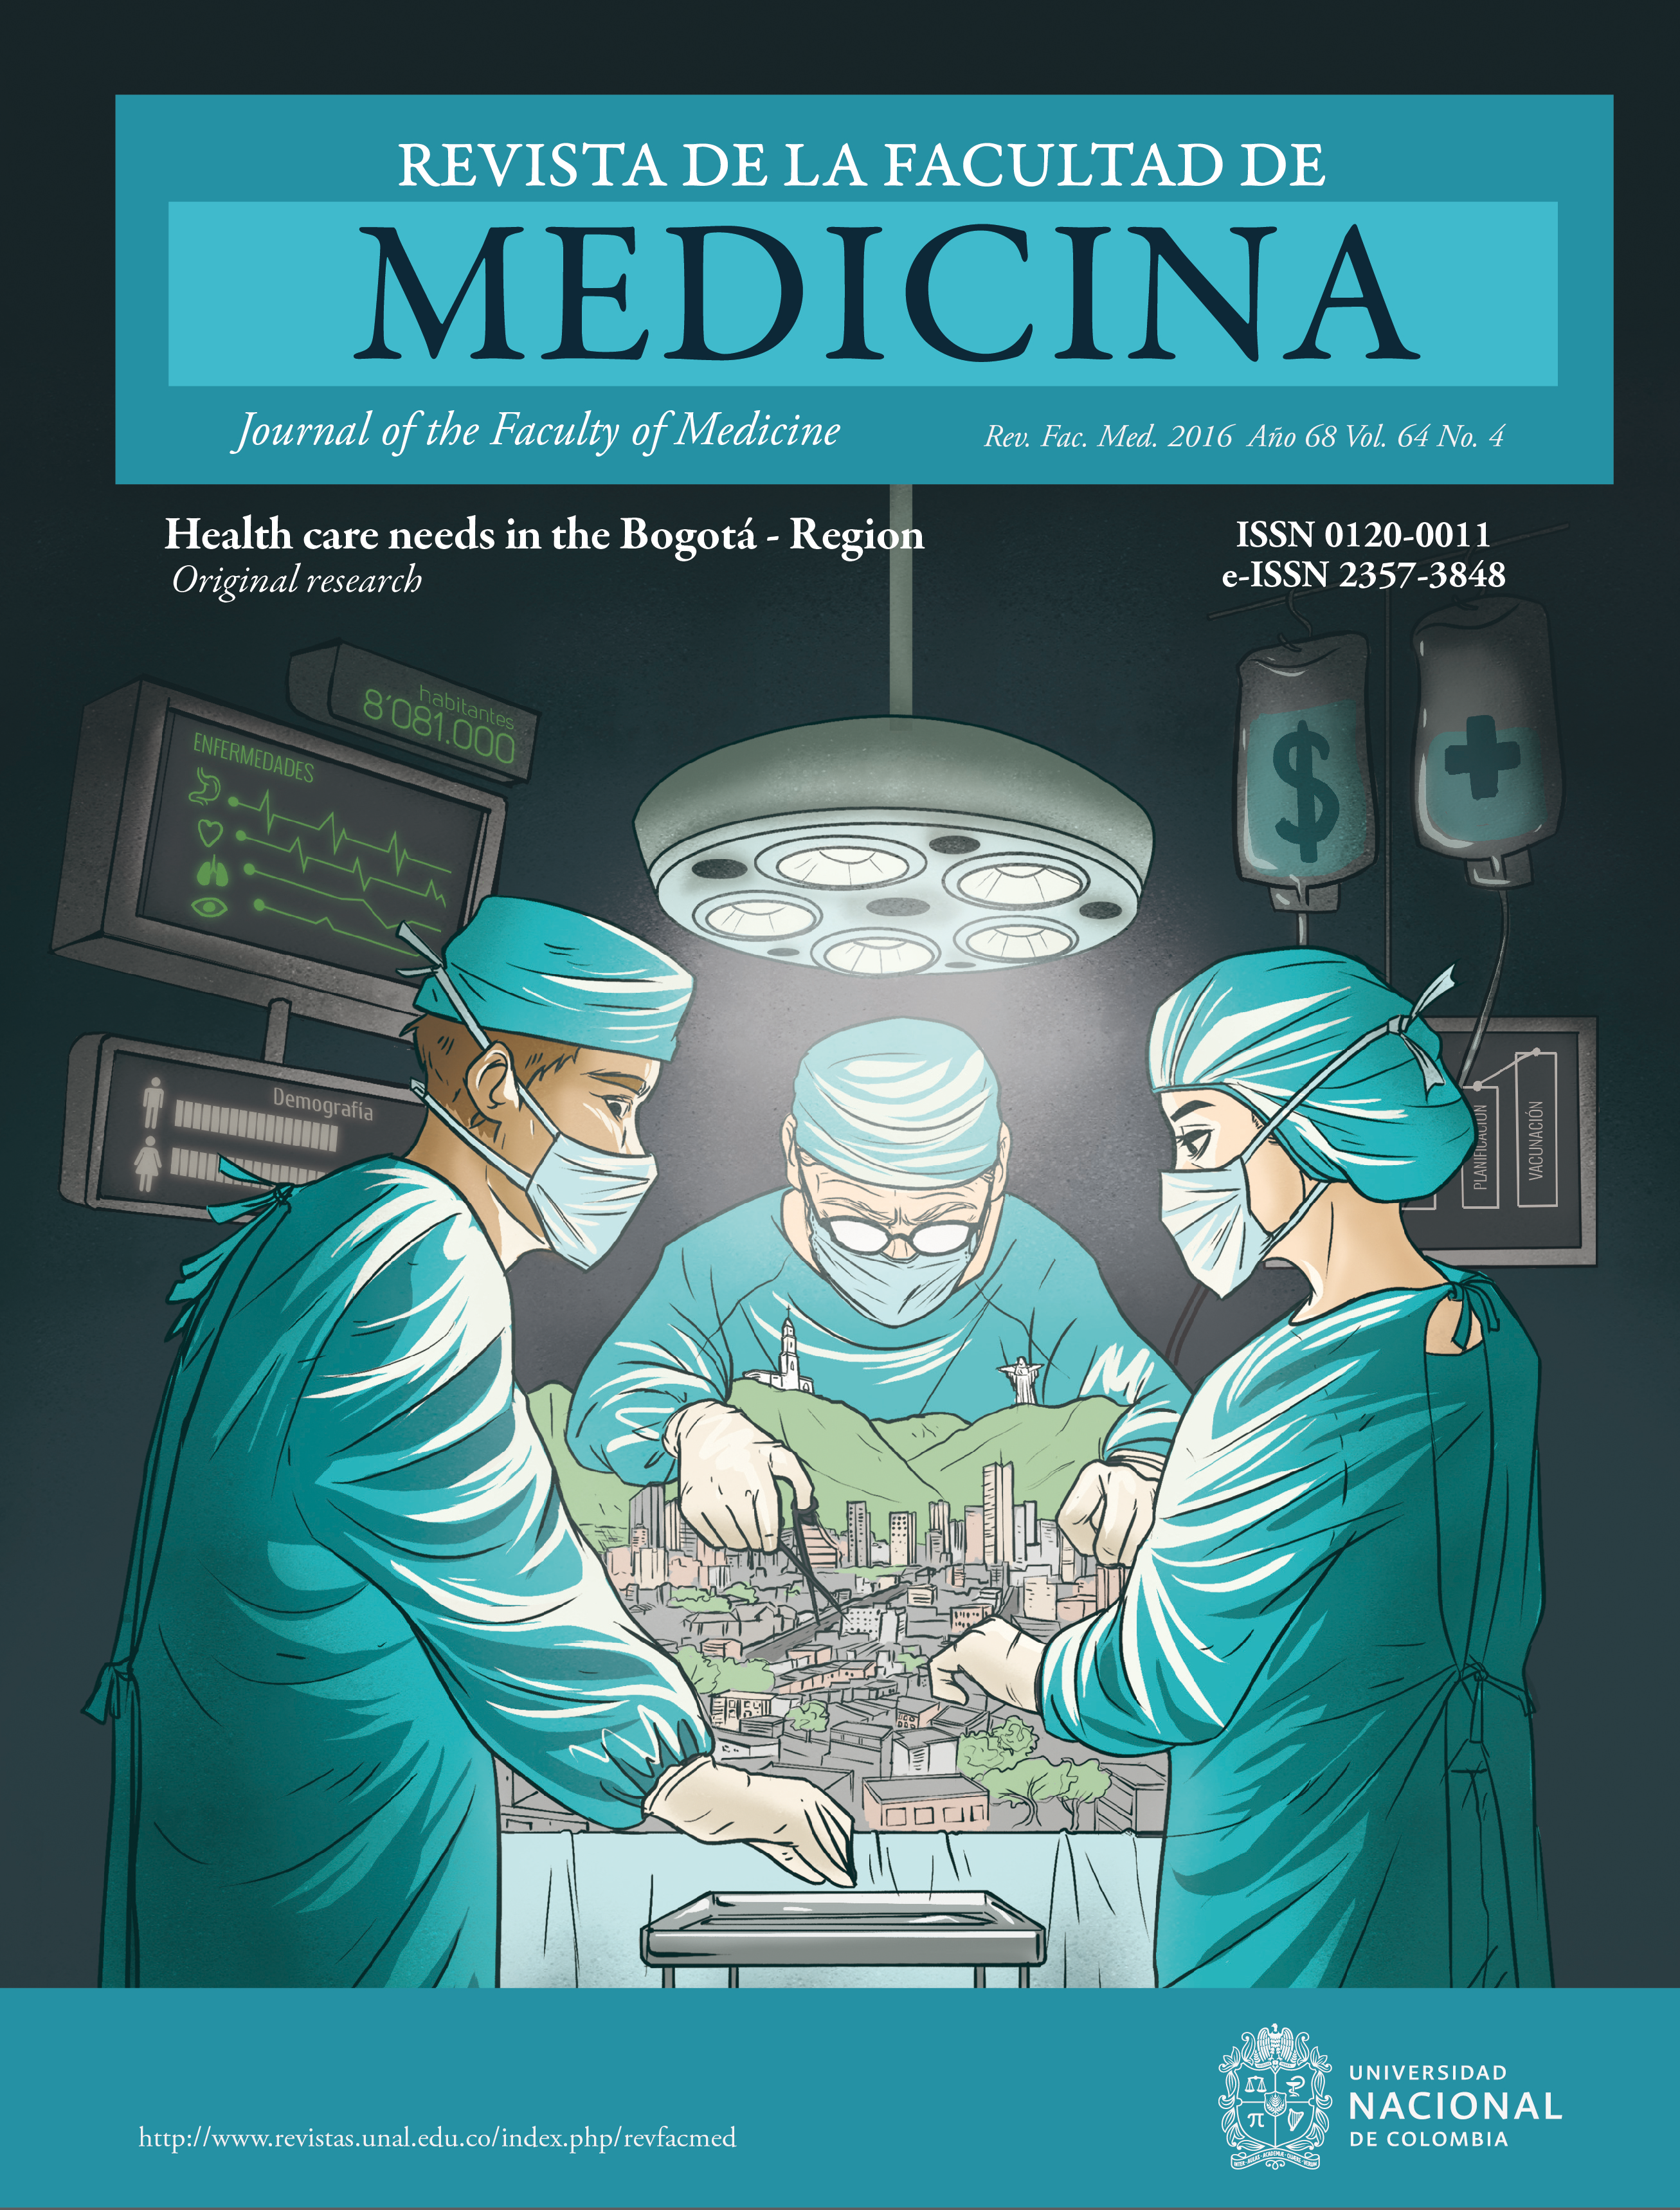 Volume 64, Issue 4, Journal of the Faculty of Medicine